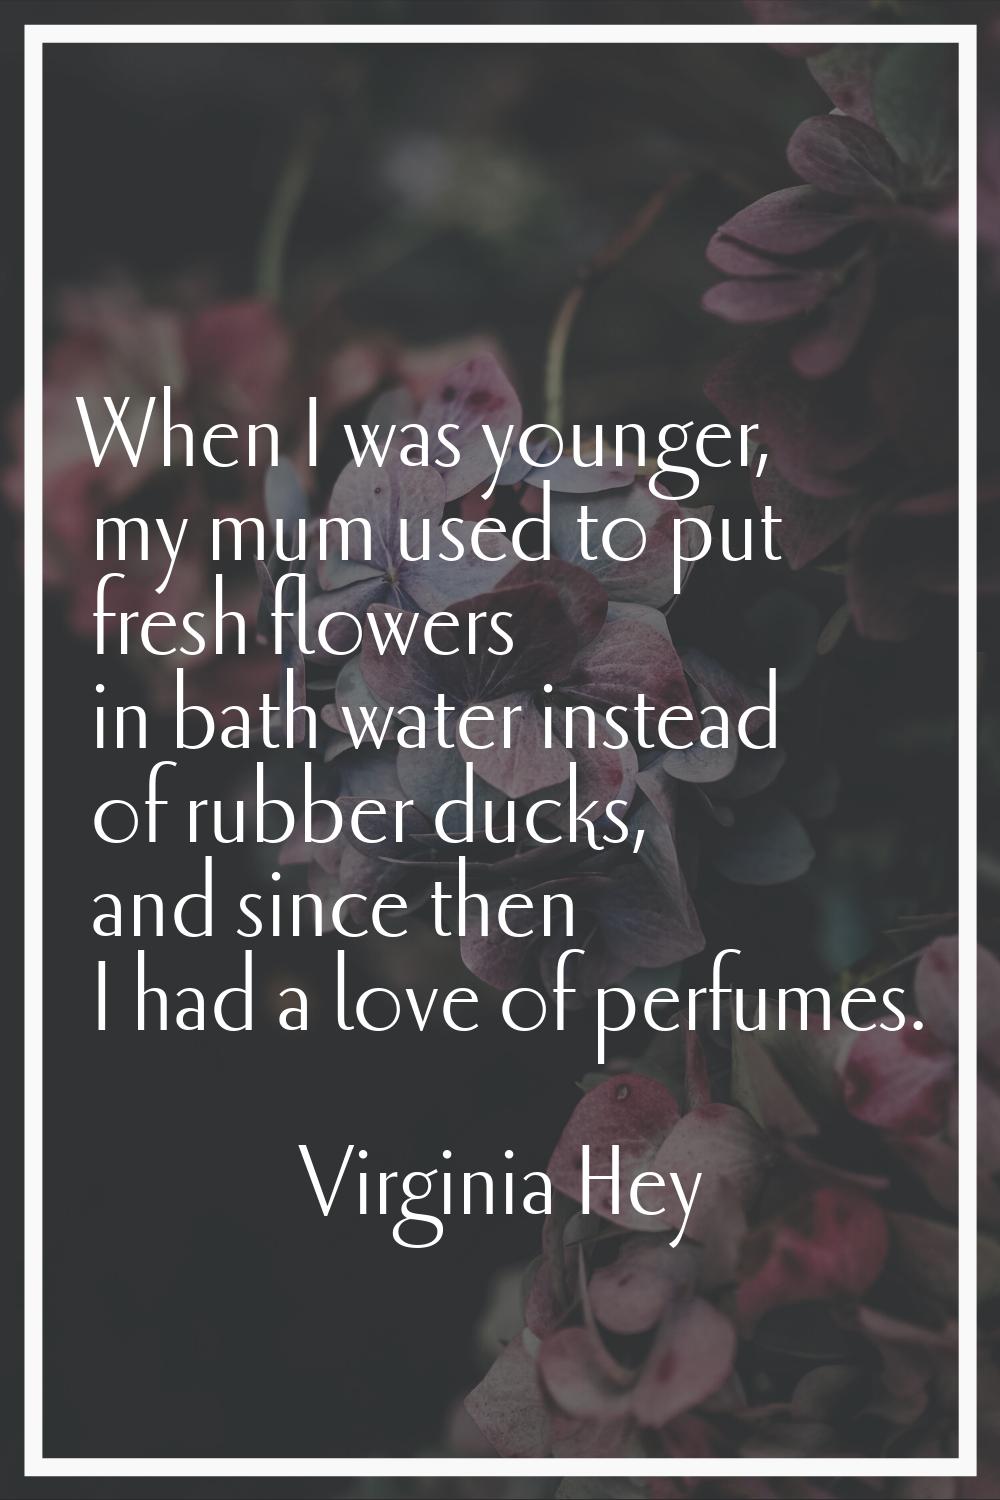 When I was younger, my mum used to put fresh flowers in bath water instead of rubber ducks, and sin